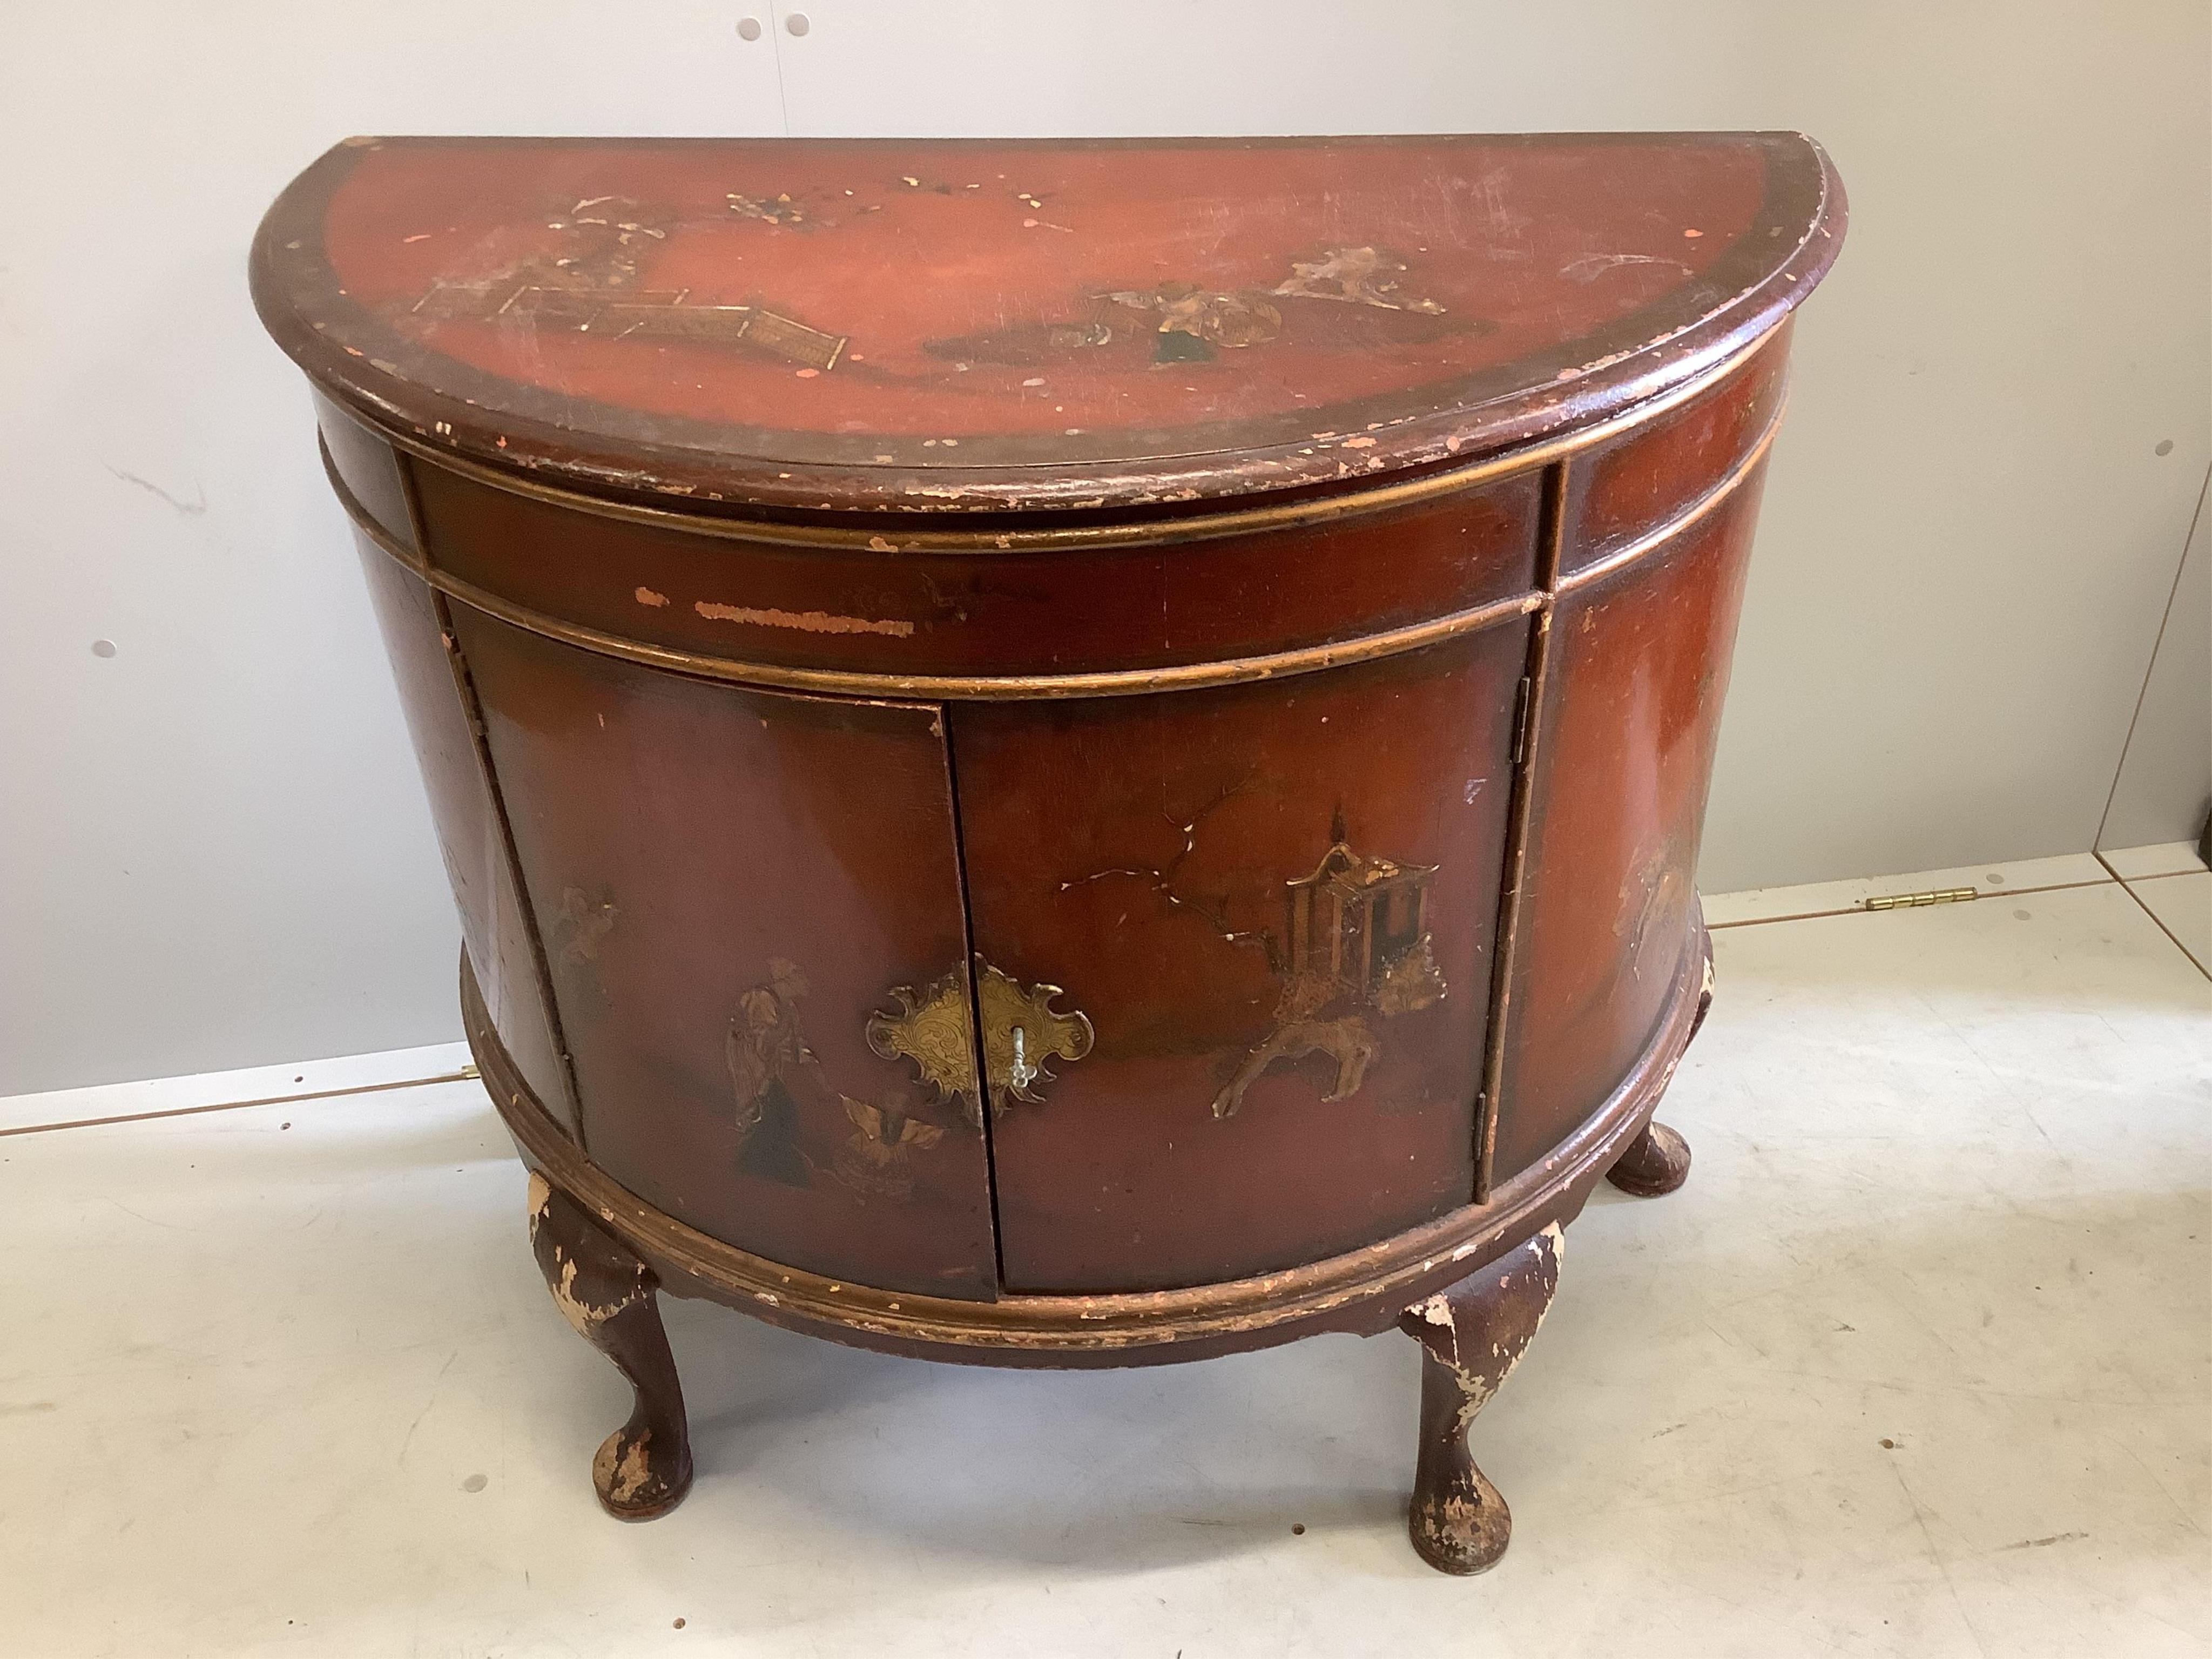 An early 20th century scarlet chinoiserie lacquer D shaped side cabinet, width 95cm, depth 49cm, height 86cm. Condition - poor